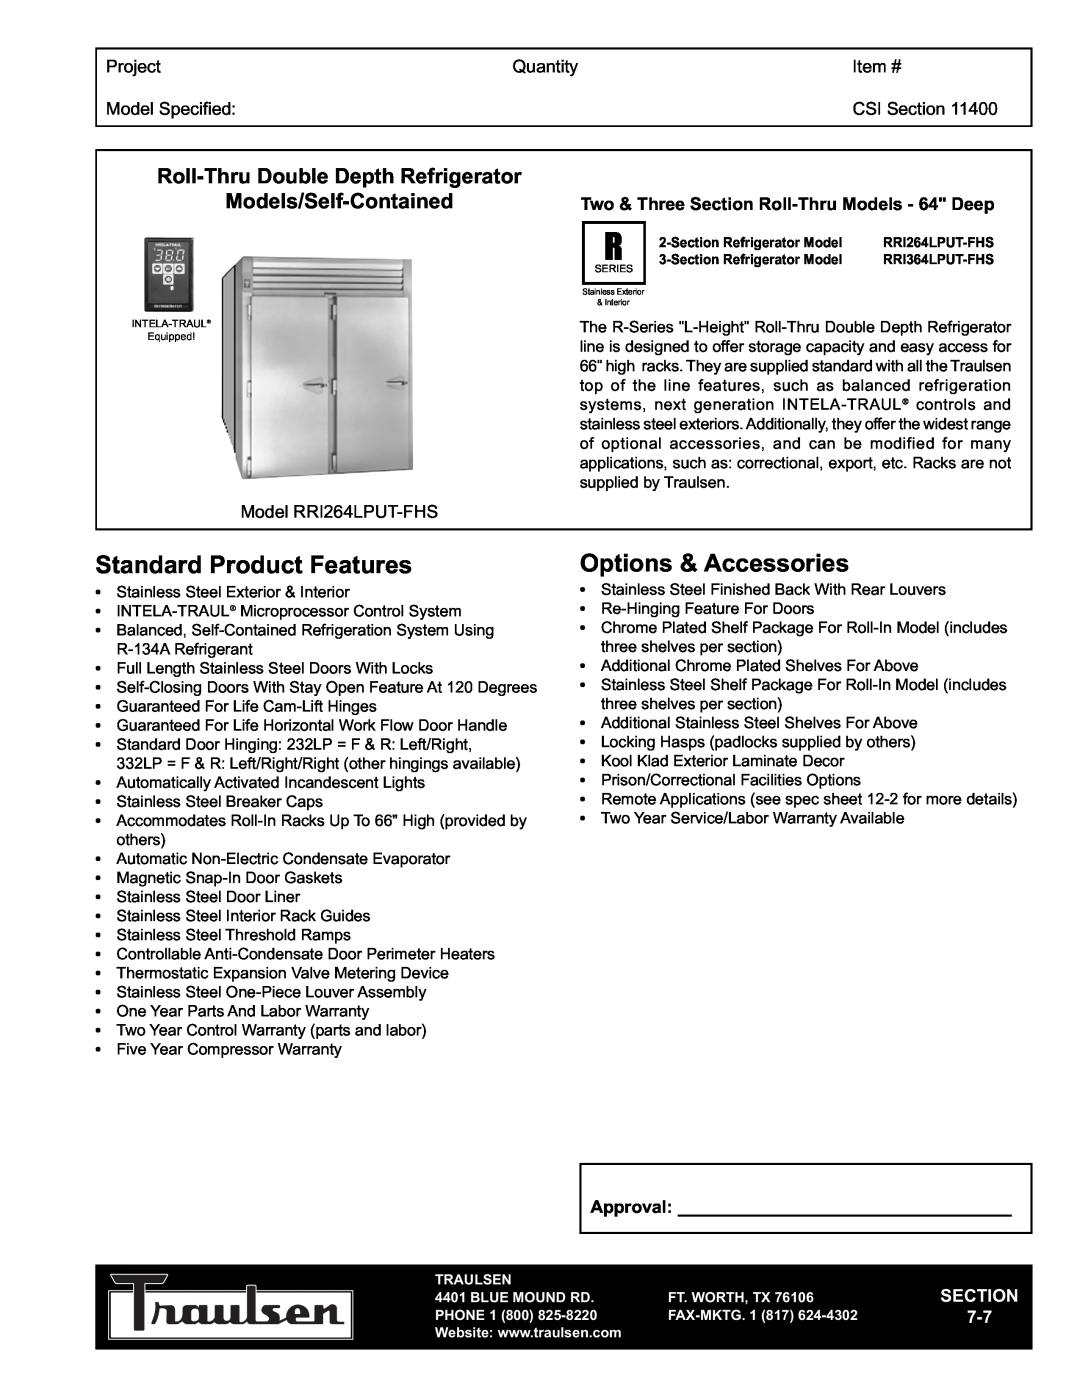 Traulsen RRI264LPUT-FHS warranty Roll-ThruDouble Depth Refrigerator, Models/Self-Contained, Project, Quantity, Item # 